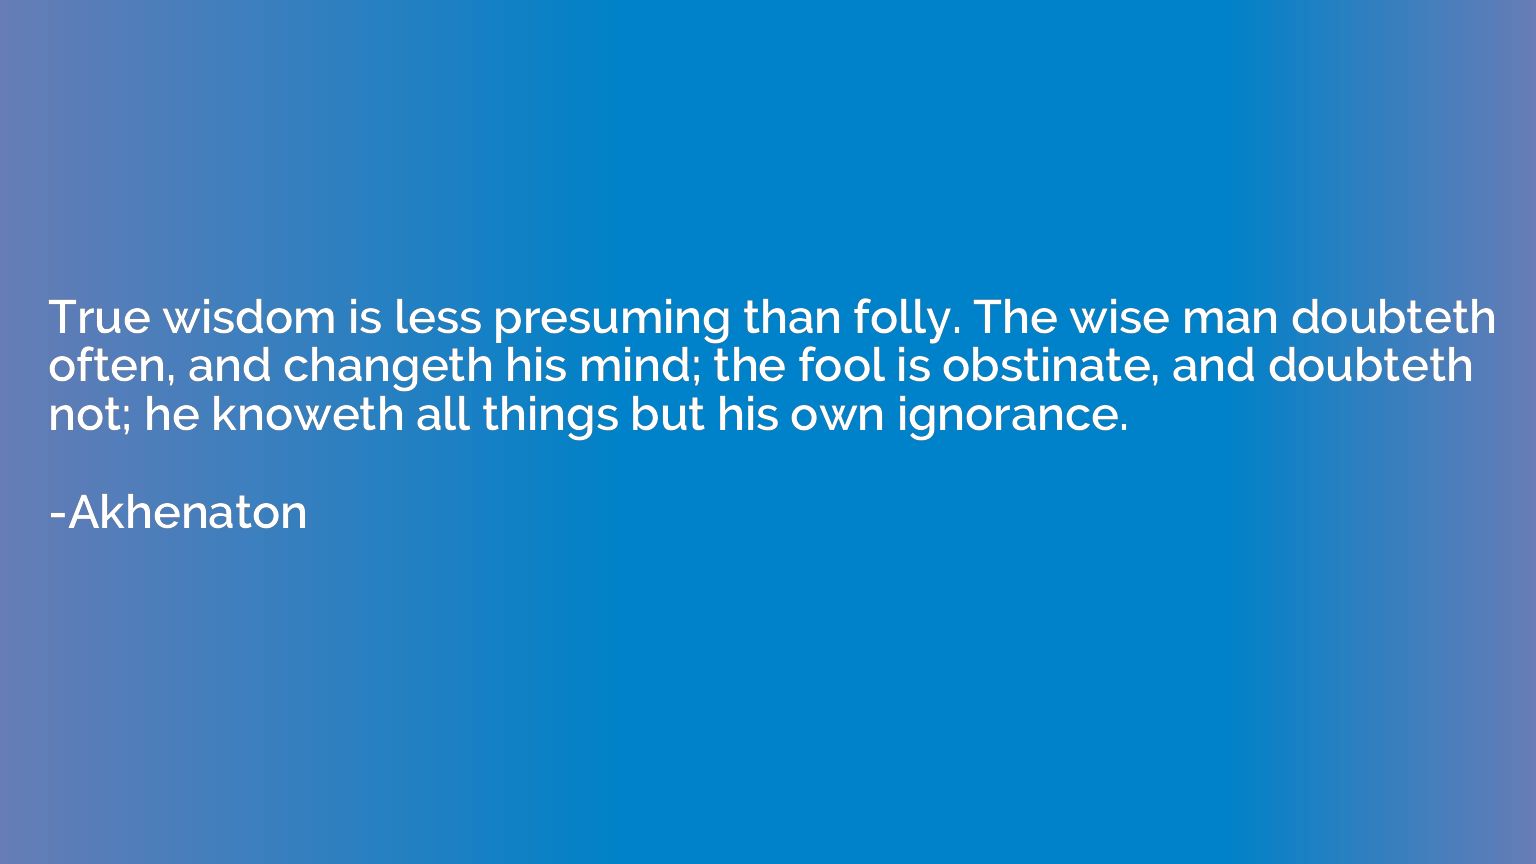 True wisdom is less presuming than folly. The wise man doubt